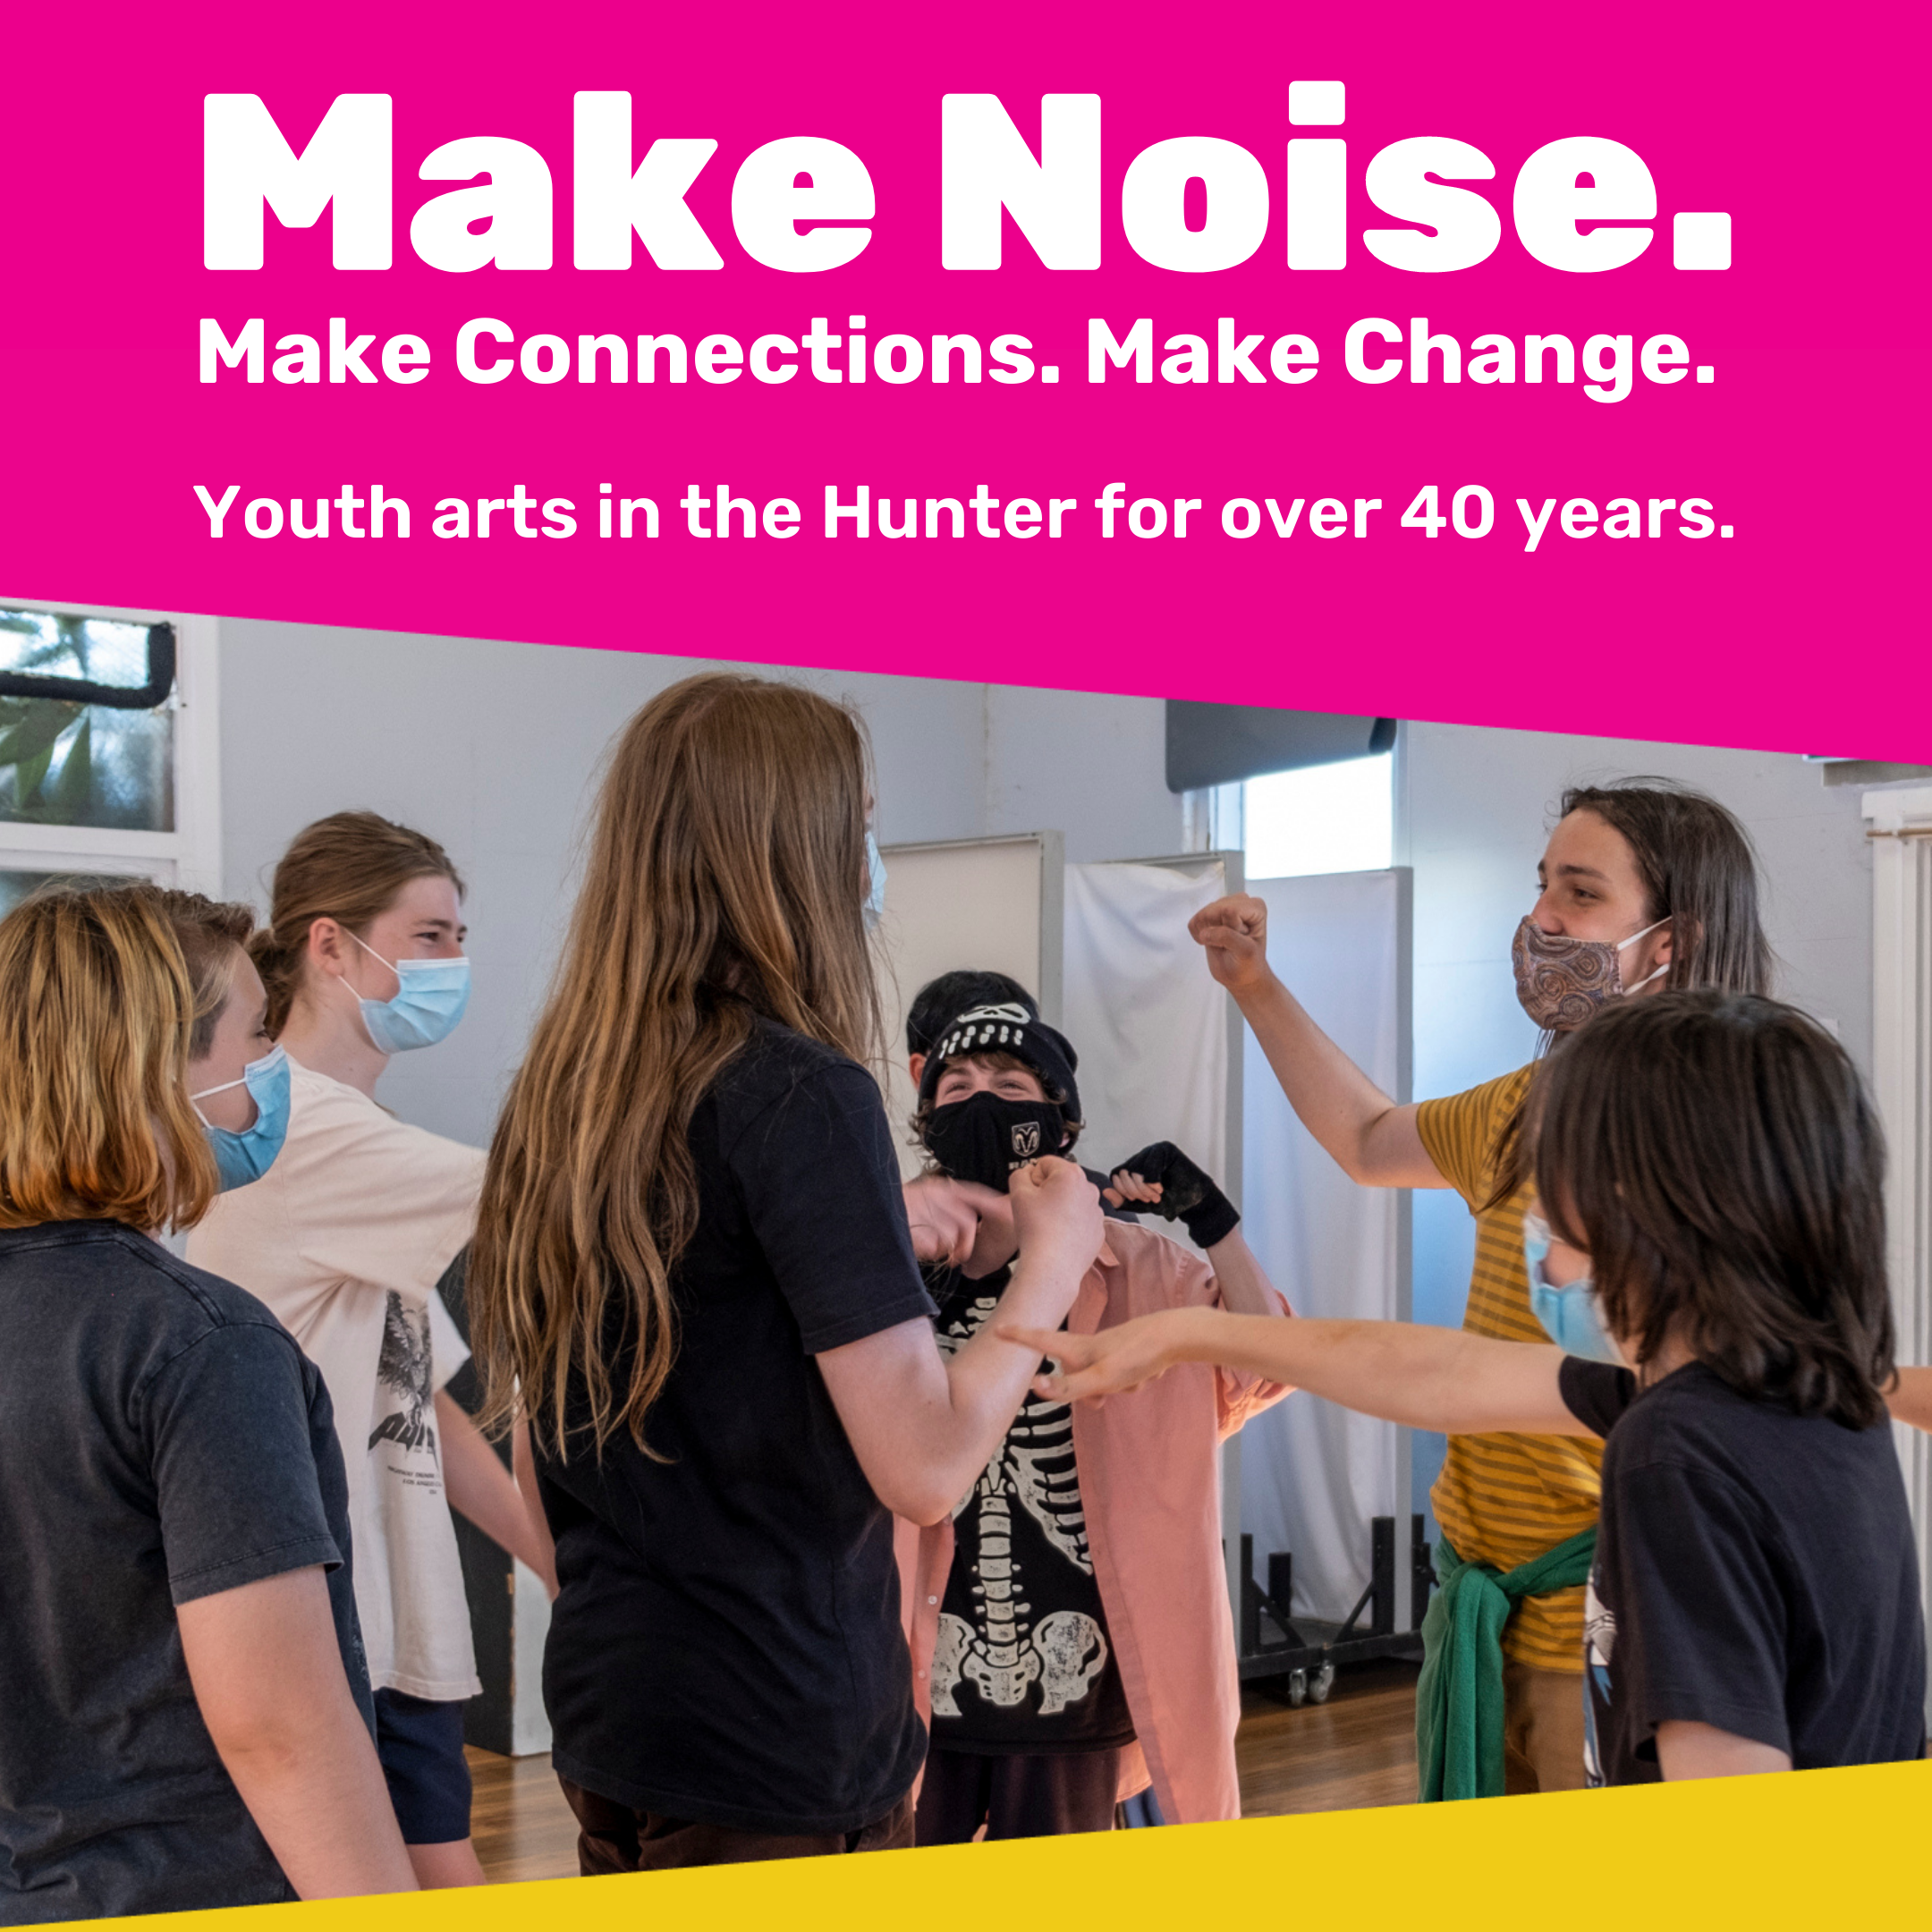 Make Noise. Make Connections. Make Change. Youth arts in the Hunter for over 40 years.